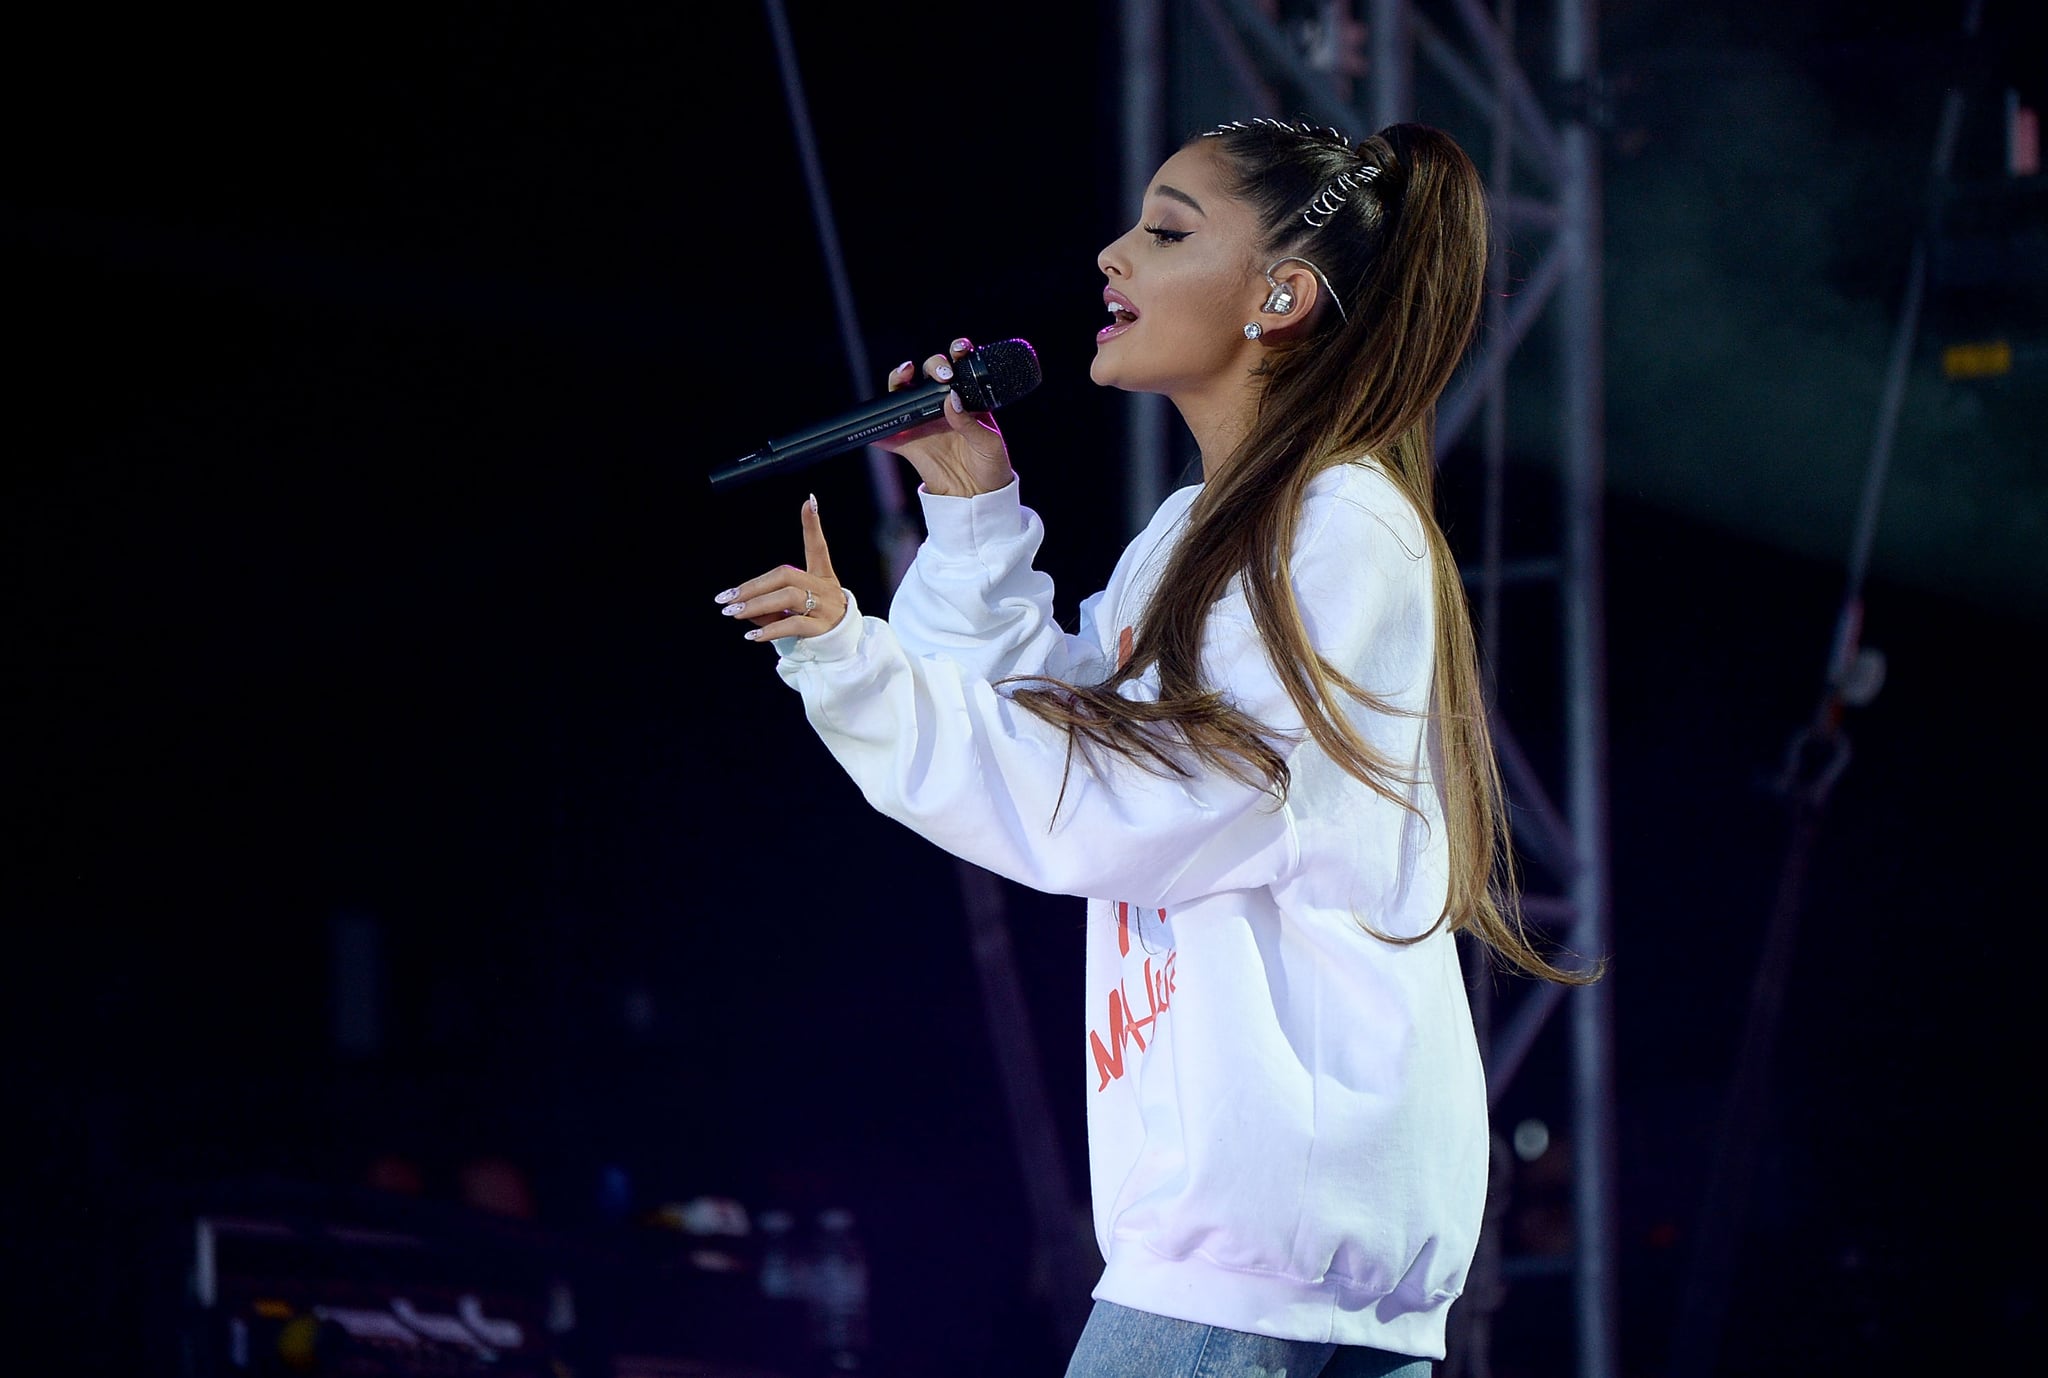 MANCHESTER, ENGLAND - JUNE 04:  Ariana Grande performs on stage during the One Love Manchester Benefit Concert at Old Trafford Cricket Ground on June 4, 2017 in Manchester, England.  (Photo by Kevin Mazur/One Love Manchester/Getty Images for One Love Manchester)